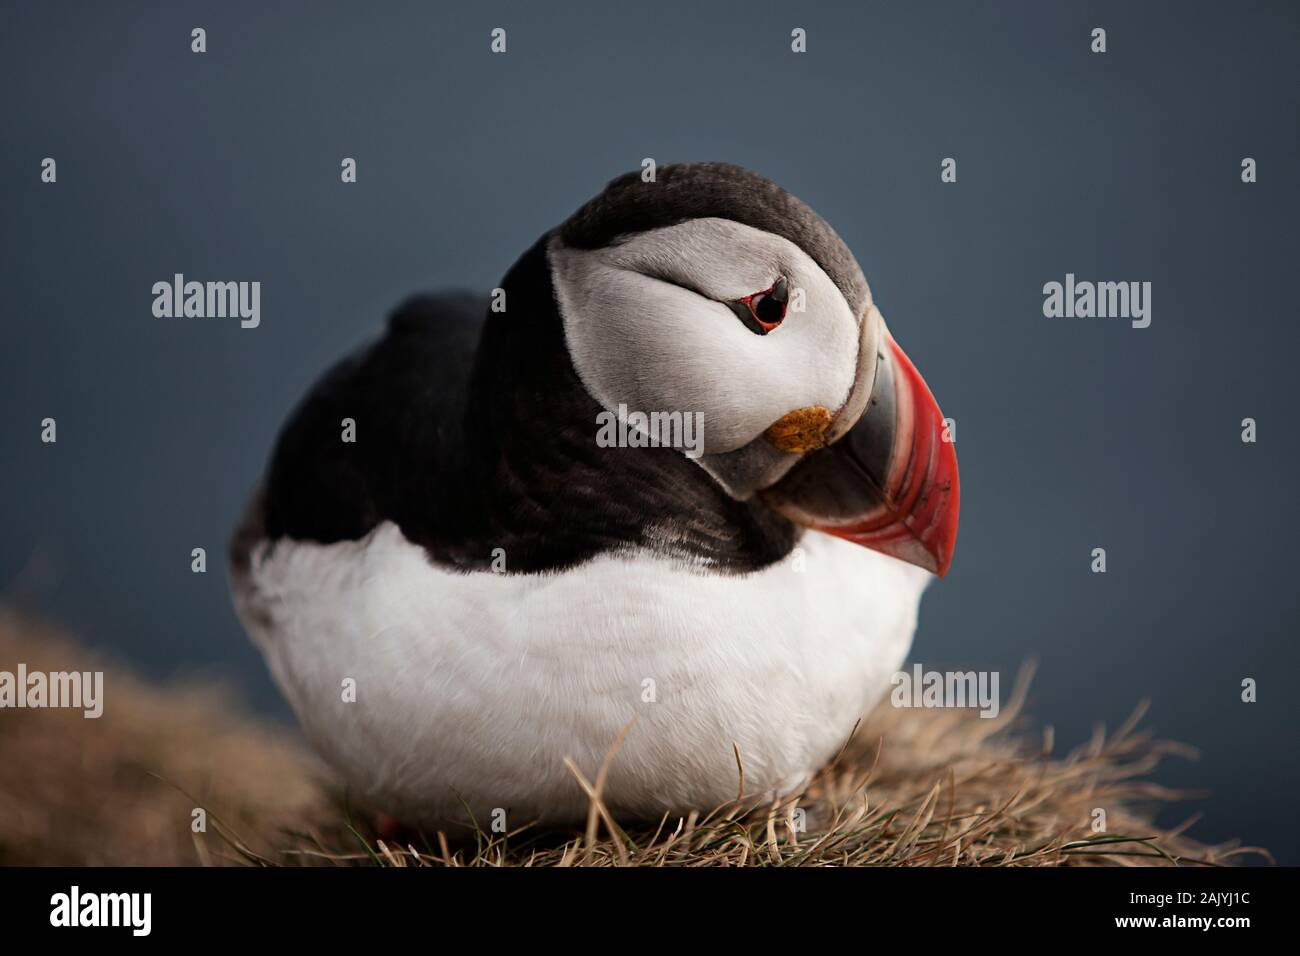 Fratercula Artica, or Puffin, in Iceland. They breed in large colonies on coastal cliffs or offshore islands, nesting in crevices among rocks. Stock Photo